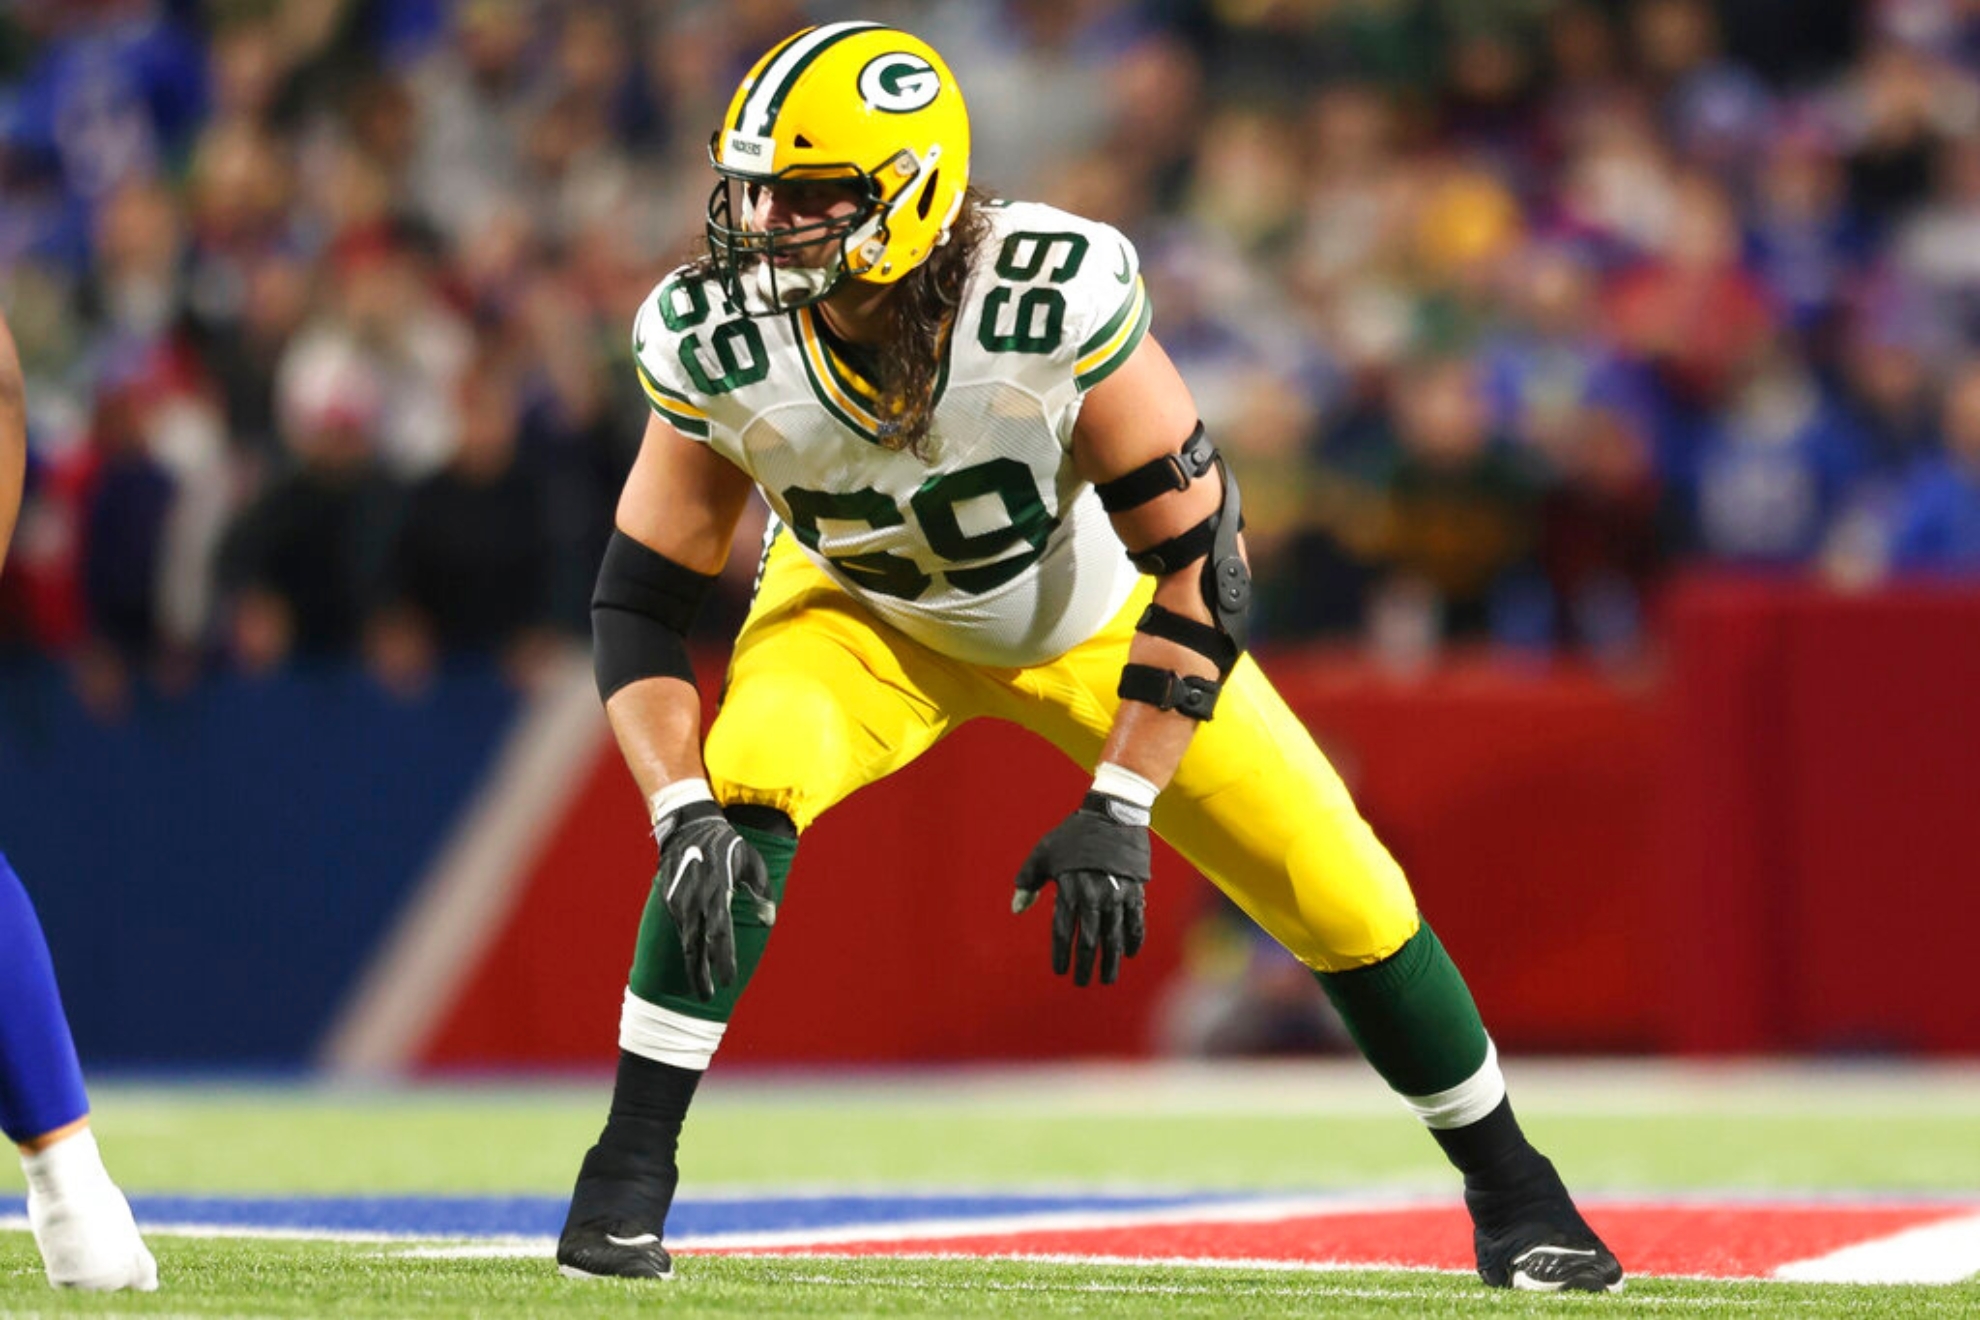 Bakhtiari is starting to become a regular on the IR list